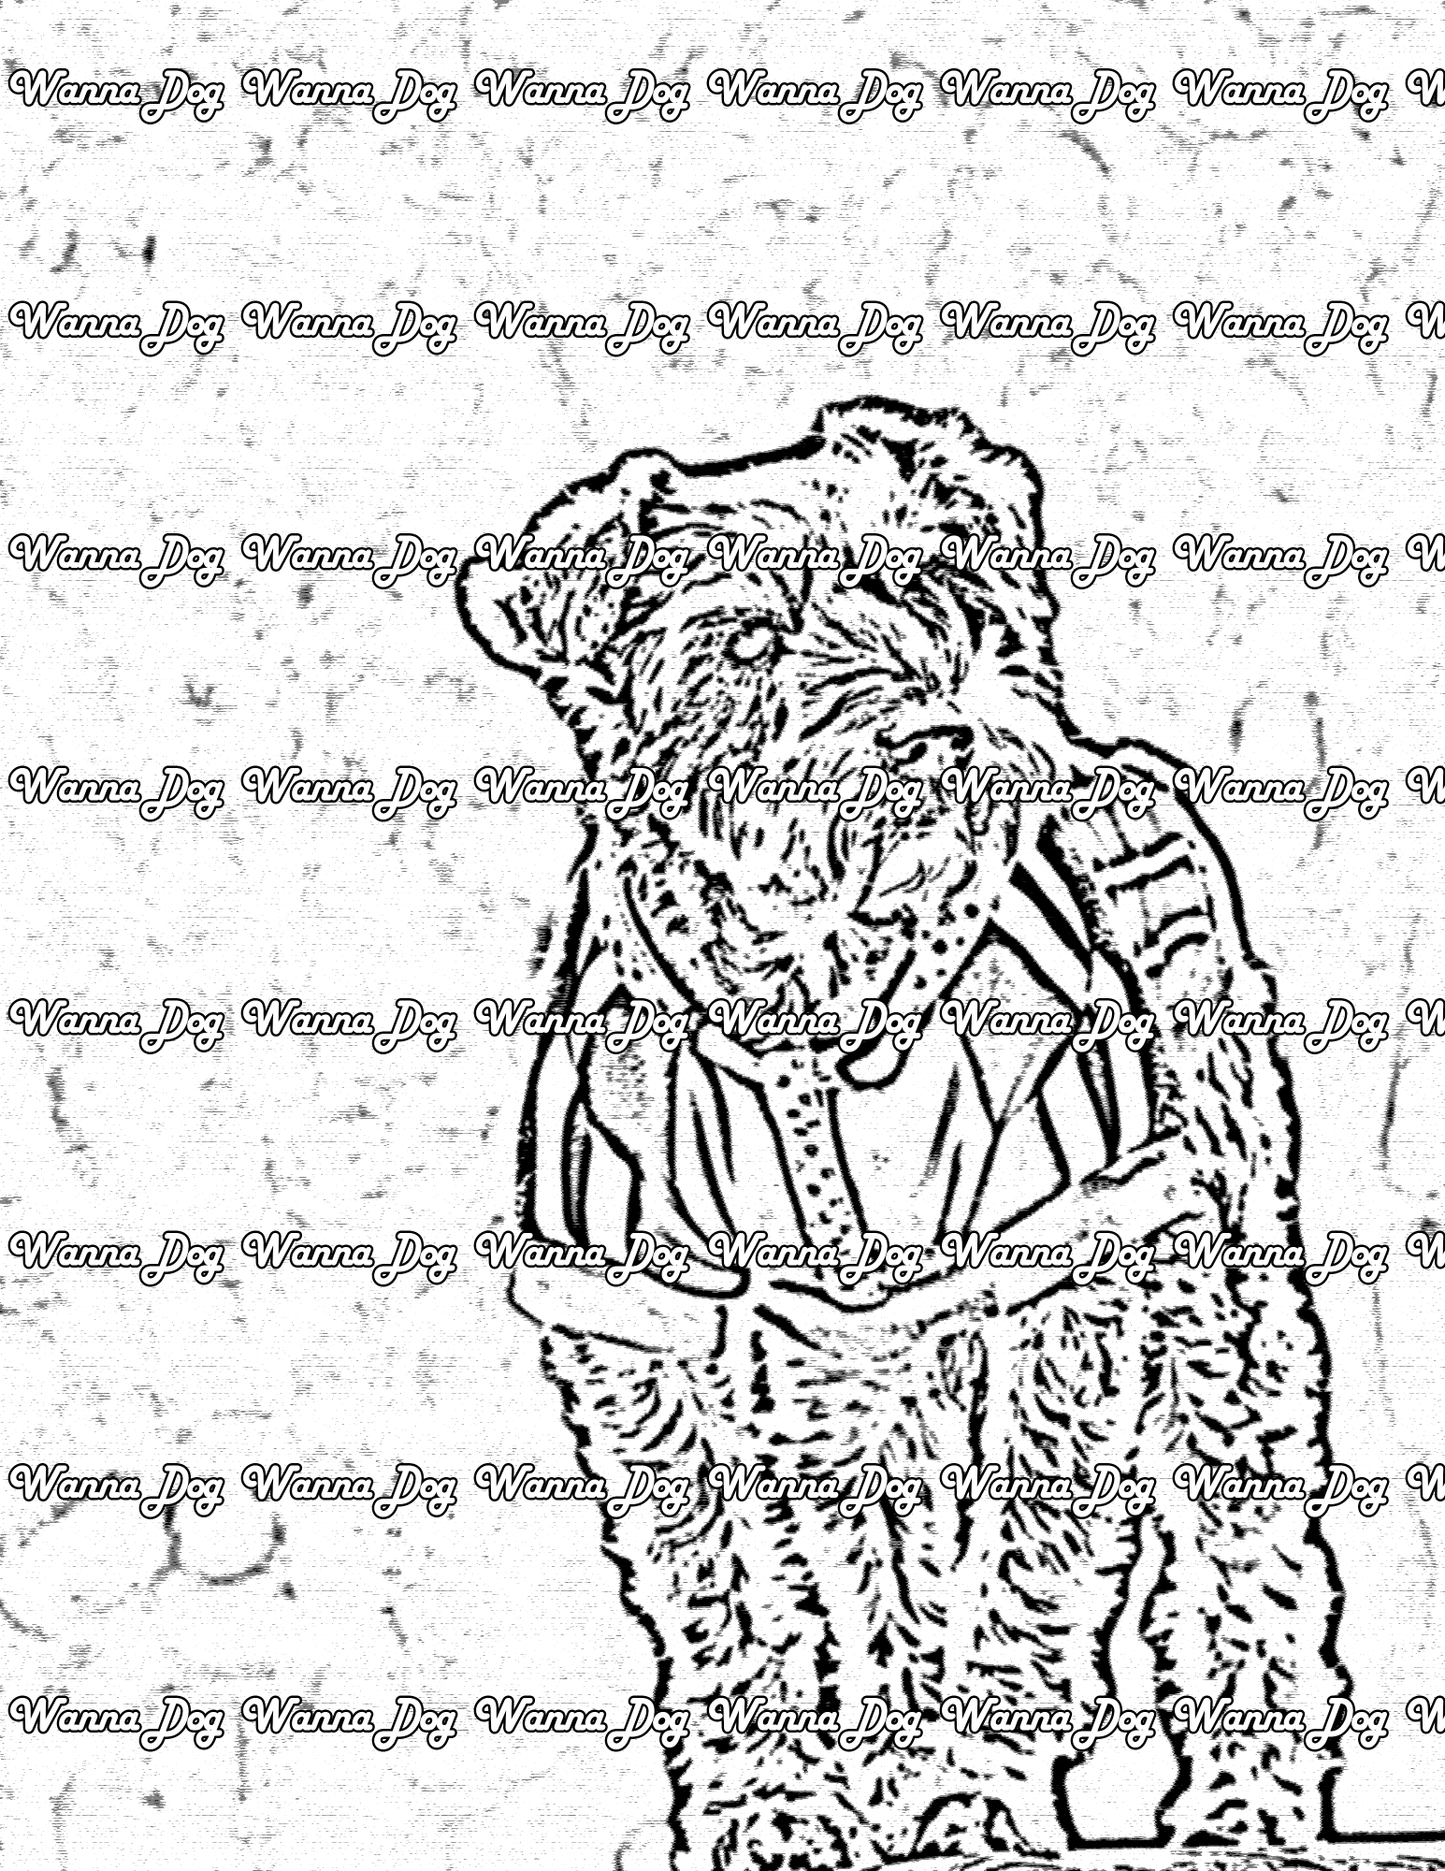 Schnauzer Coloring Page of a Schnauzer wearing nice clothes